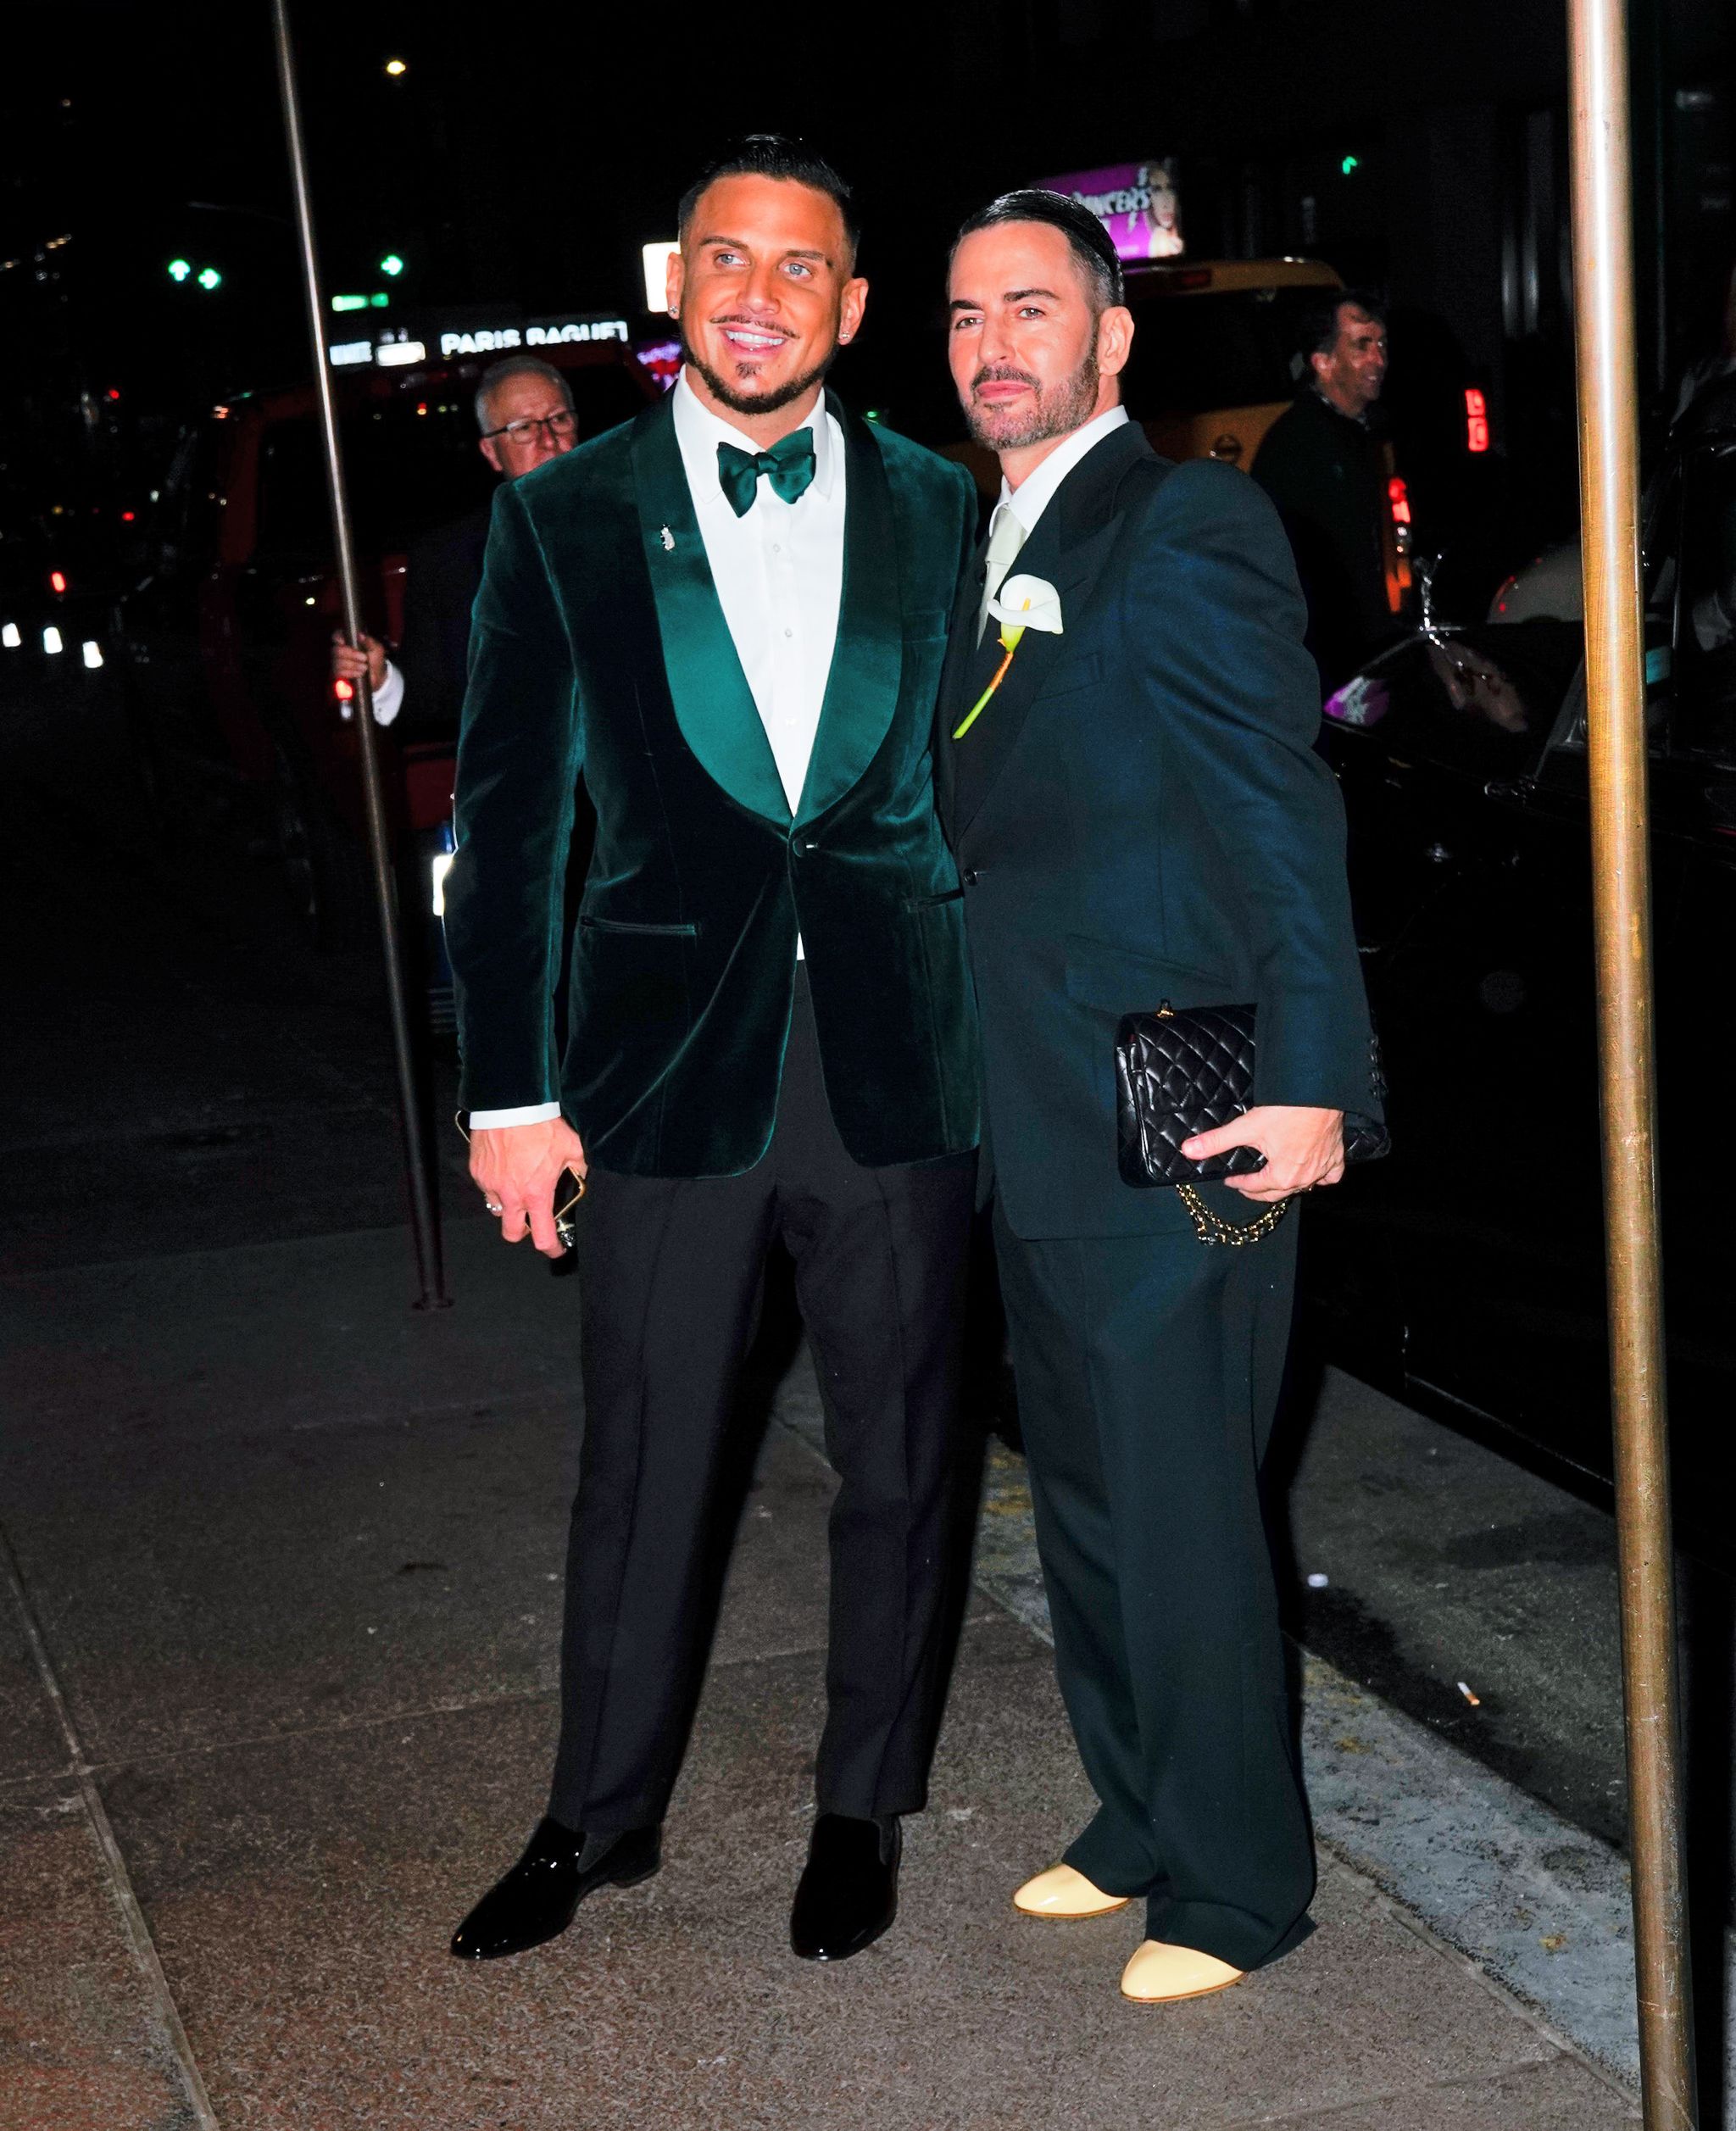 Marc Jacobs Gets Married in Lavish New York Wedding